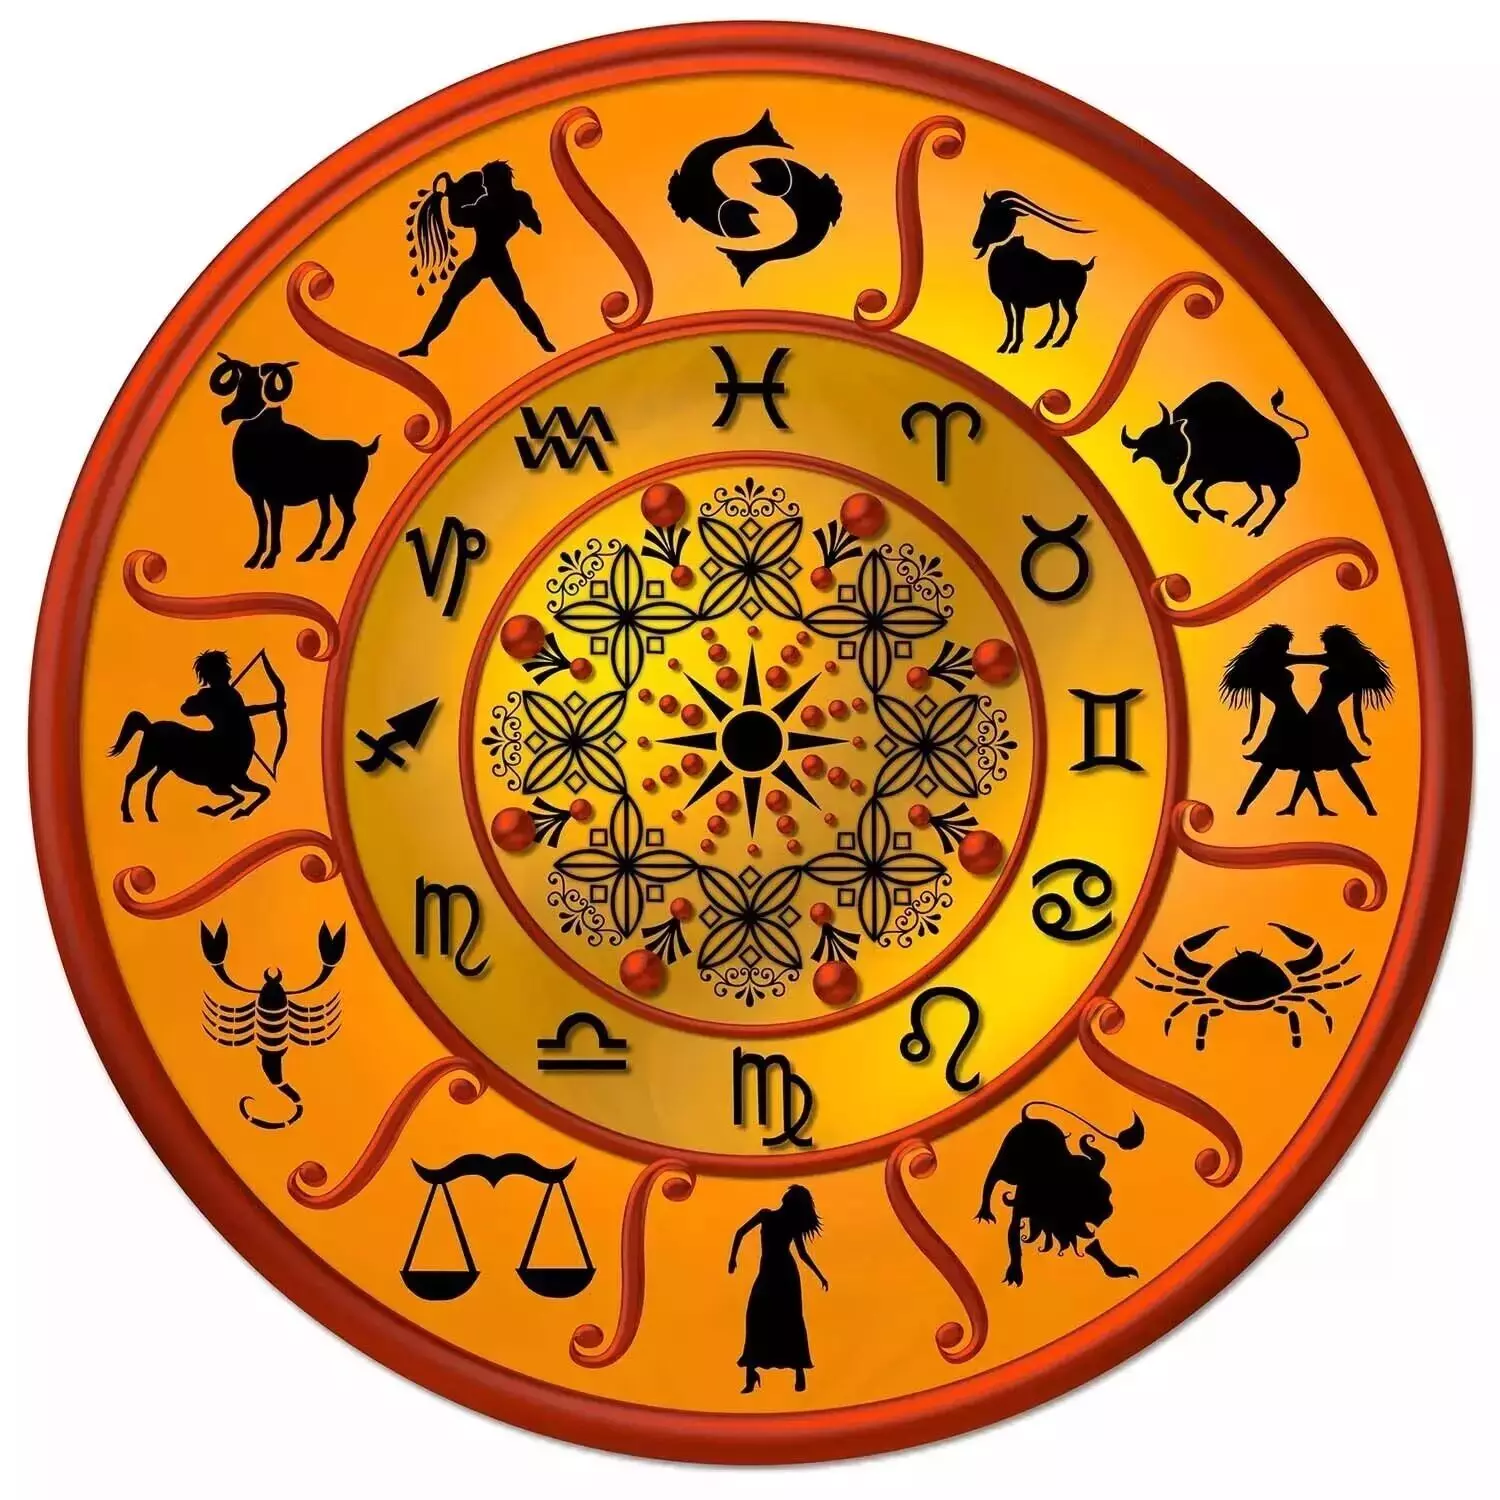 03 June  – Know your todays horoscope